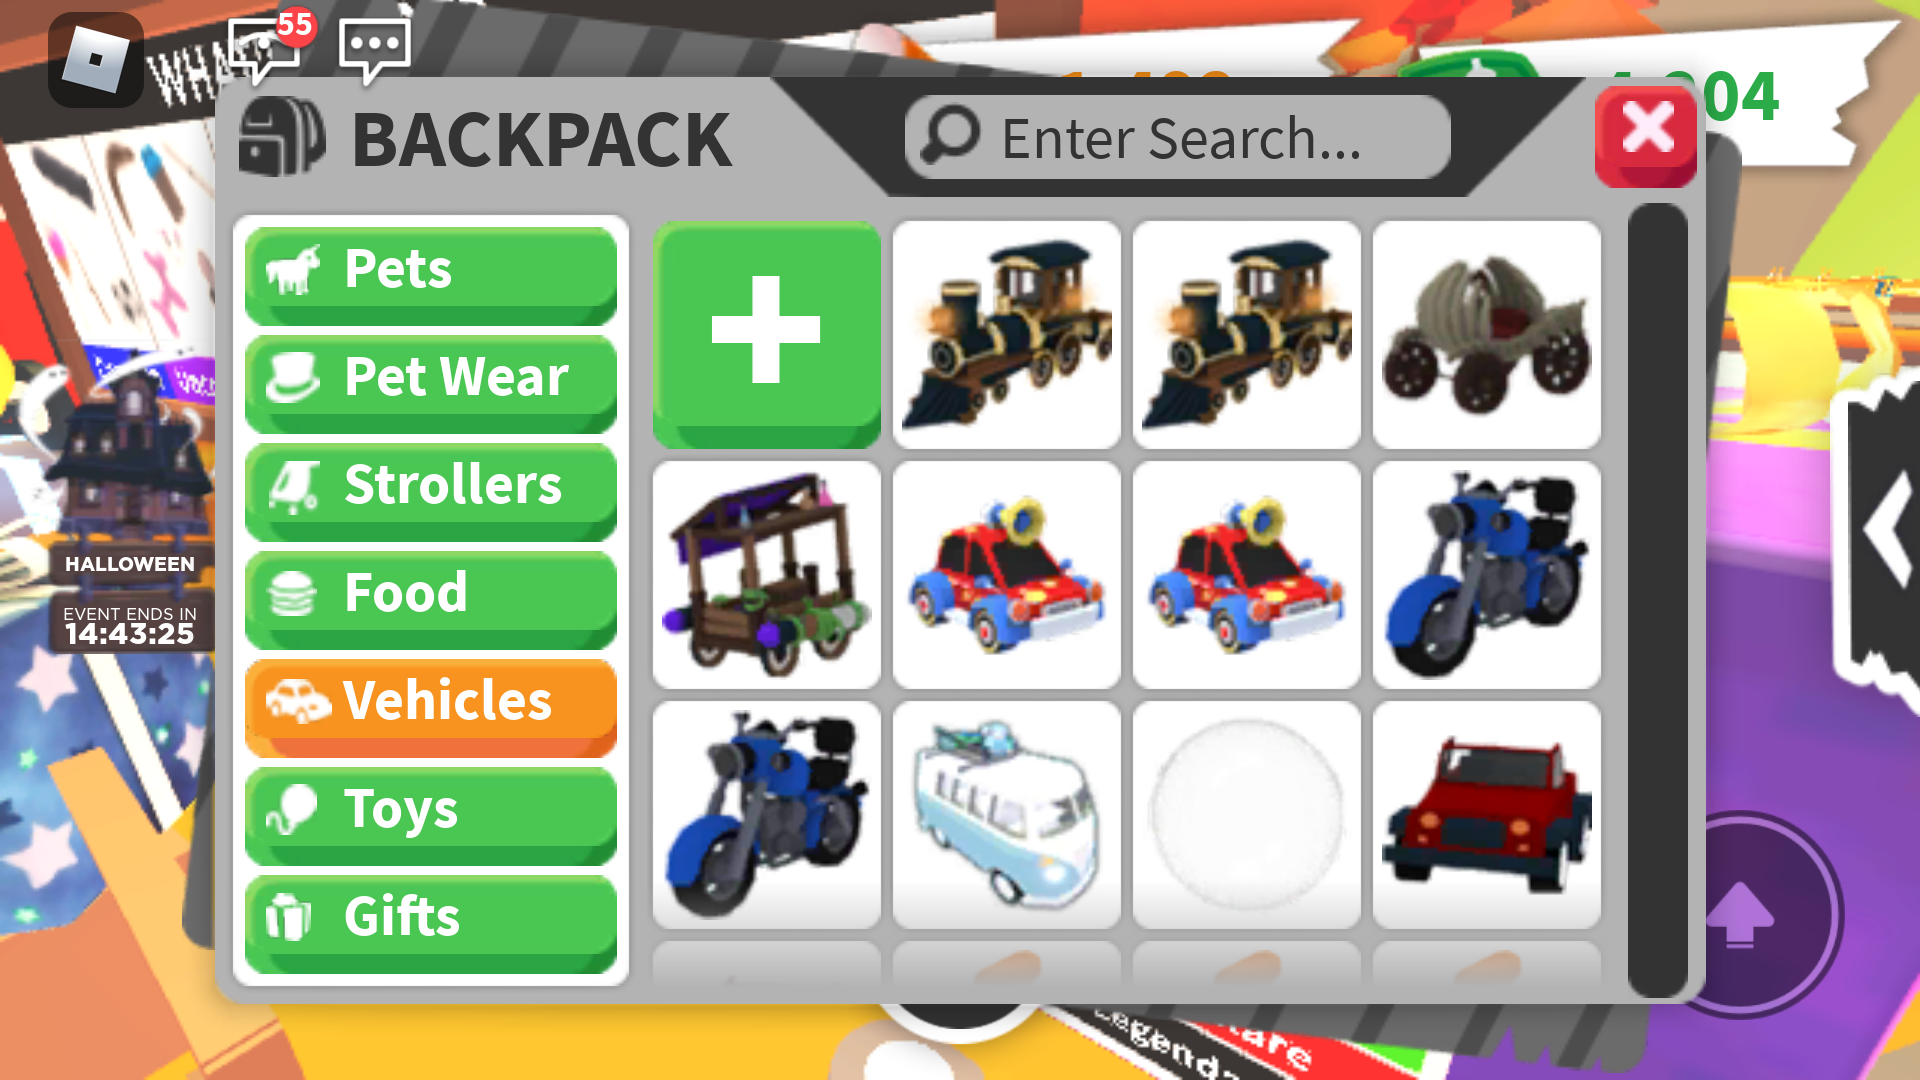 Fbykuijtrpg0zm - adopt meroyal carriages roblox instructions hack